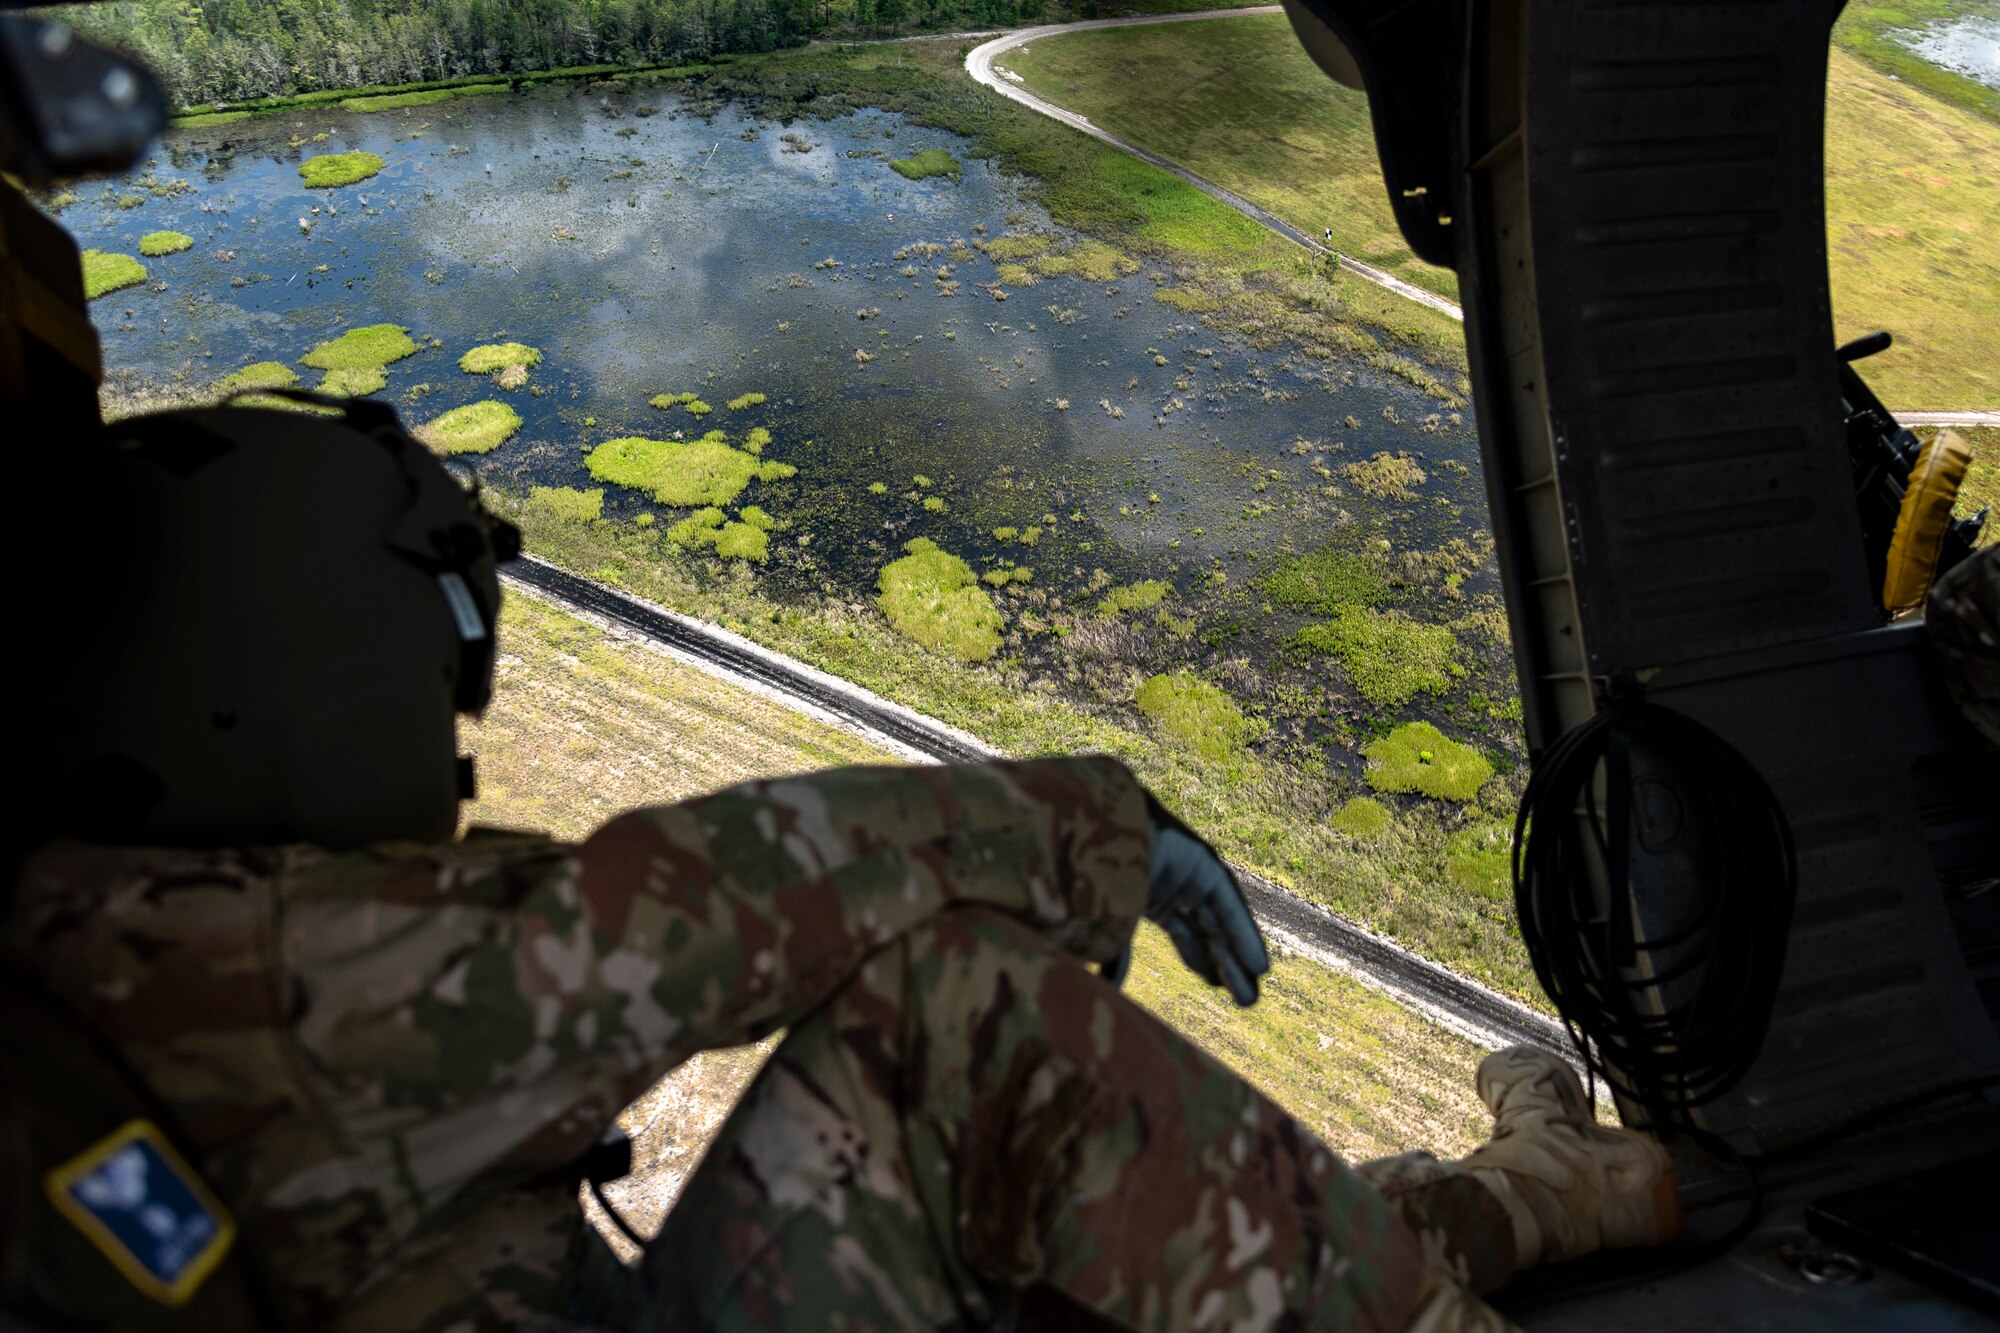 U.S. Air Force Chief Master Sgt. Benjamin Hedden, Ninth Air Force command chief, looks over Grand Bay Range at Moody Air Force Base, Ga., Aug. 8, 2019. Hedden joined U.S. Air Force Maj. Gen. Chad Franks, Ninth Air Force commander, for the initial flight in Franks’ flagship aircraft, an HH-60G Pave Hawk assigned to the 41st Rescue Squadron. Franks, who on separate occasions served as the commander for the 23d Wing and 347th Rescue Group, is a command pilot with more than 3,300 hours in multiple aircraft including HC-130J Combat King II and HH-60G Pave Hawk. (U.S. Air Force photo by Airman 1st Class Taryn Butler)